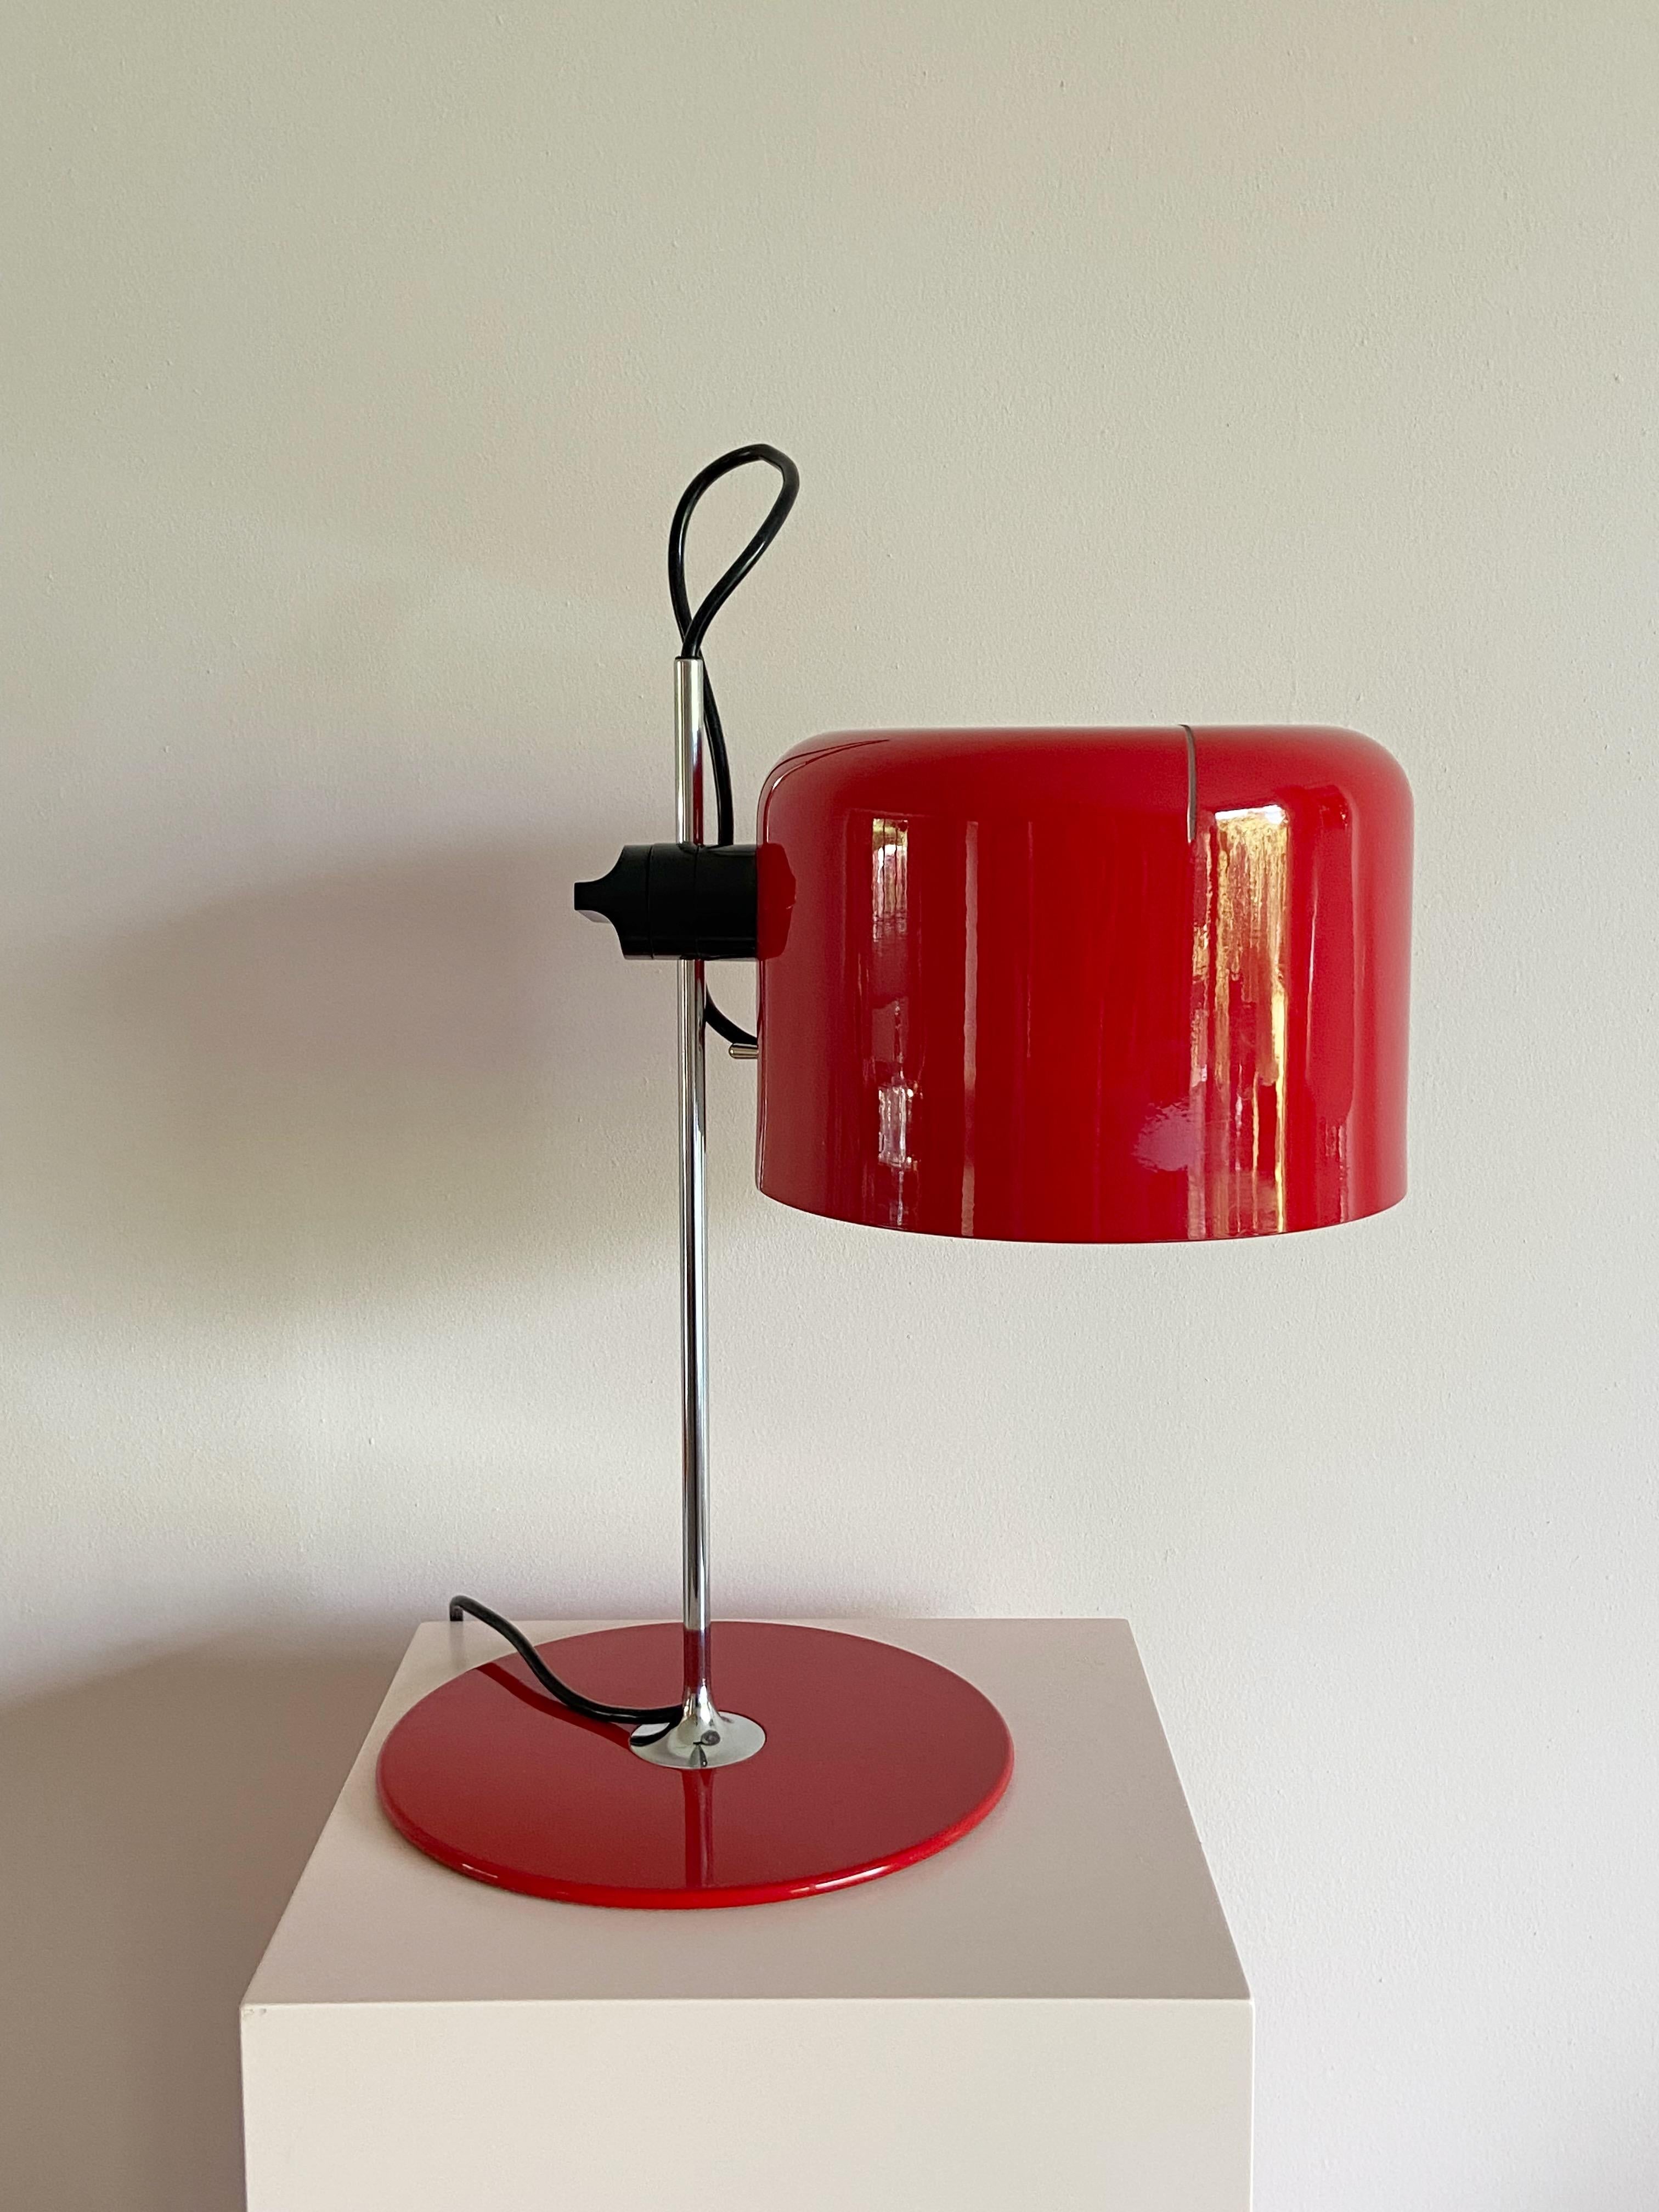 Italian Vintage red Joe Colombo Table Lamp Coupe by Oluce 1967 Made in Italy